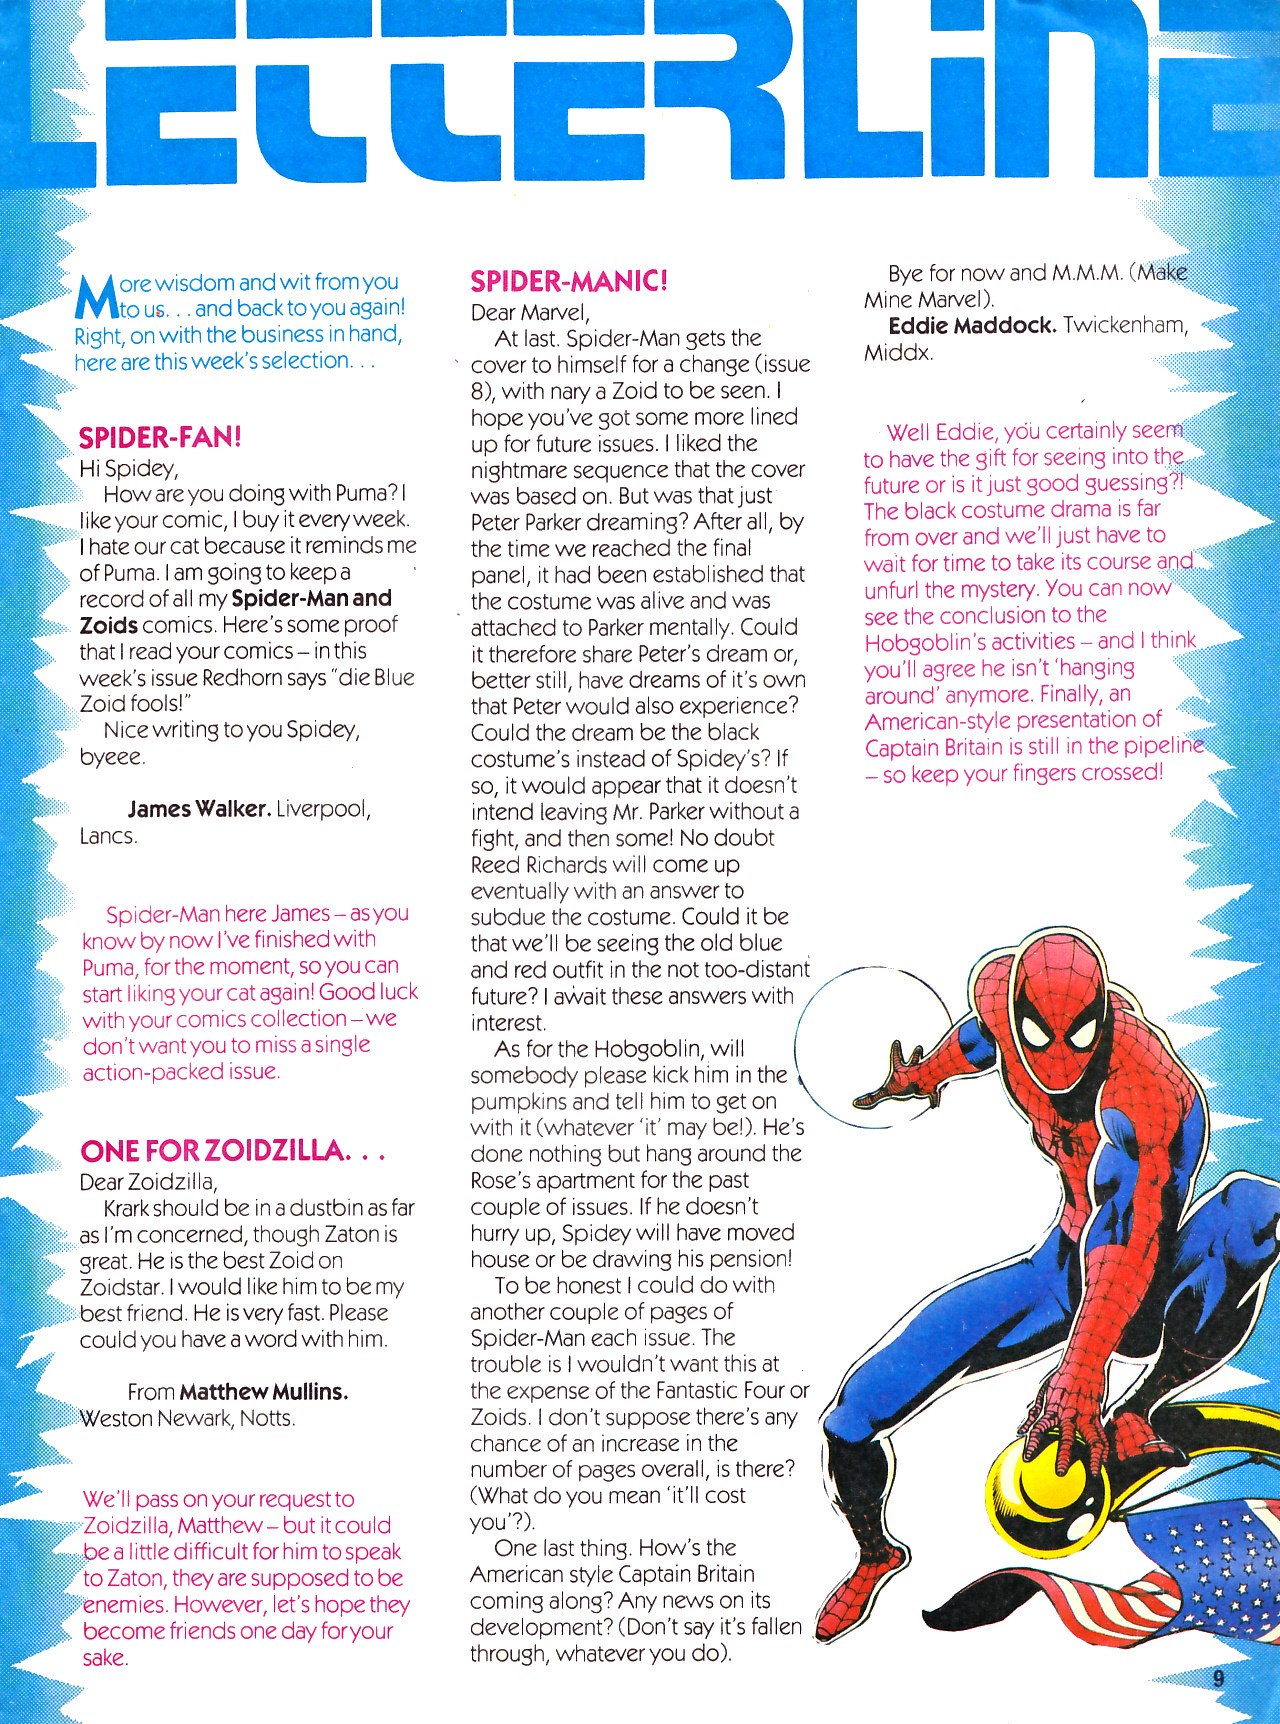 Read online Spider-Man and Zoids comic -  Issue #15 - 9